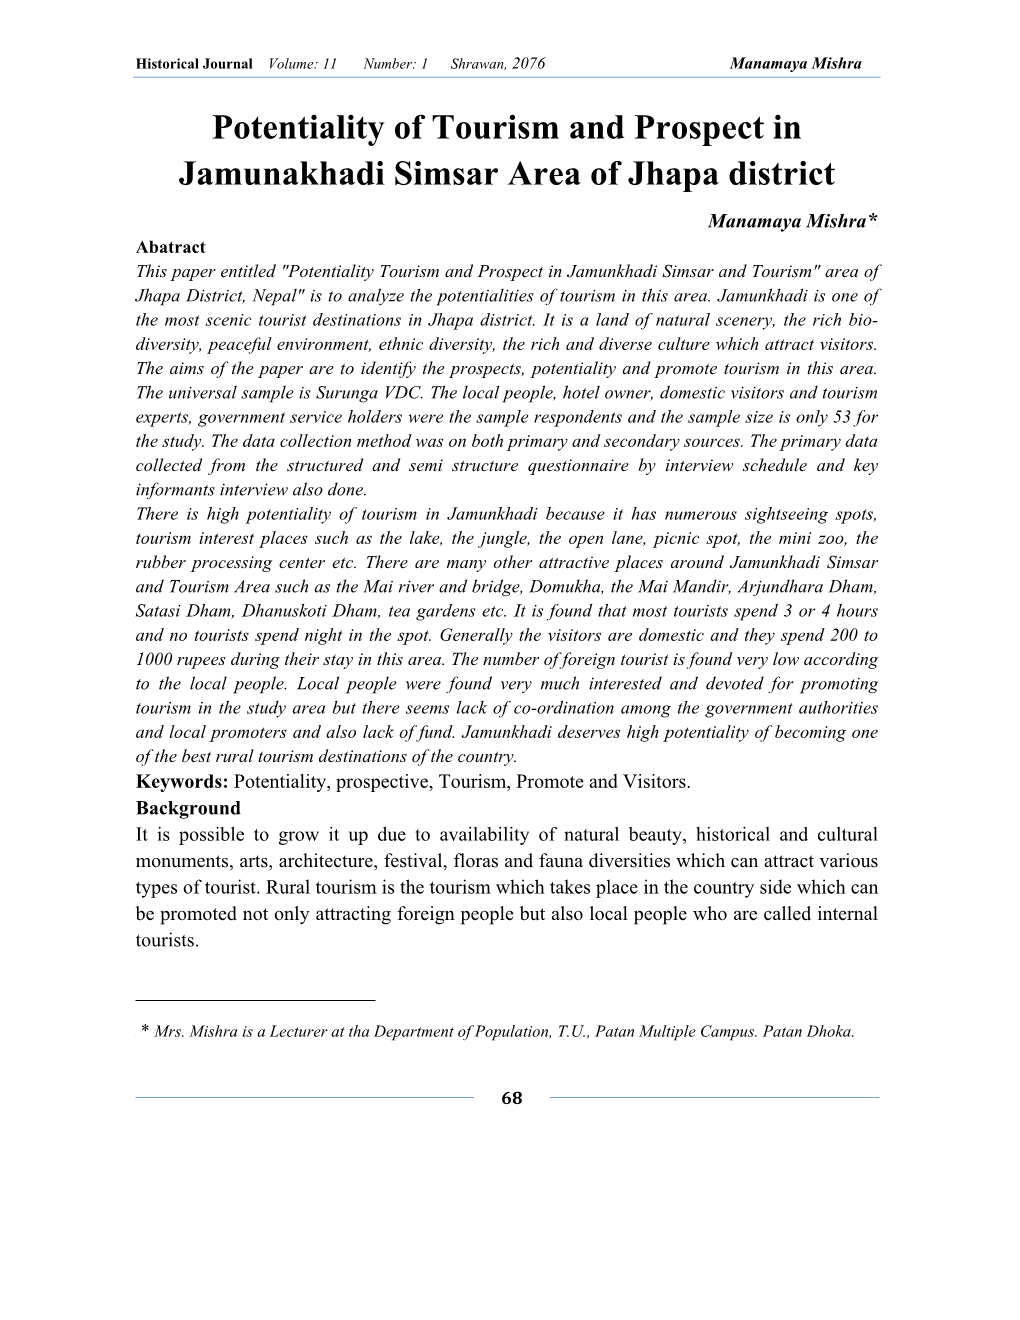 Potentiality of Tourism and Prospect in Jamunakhadi Simsar Area of Jhapa District